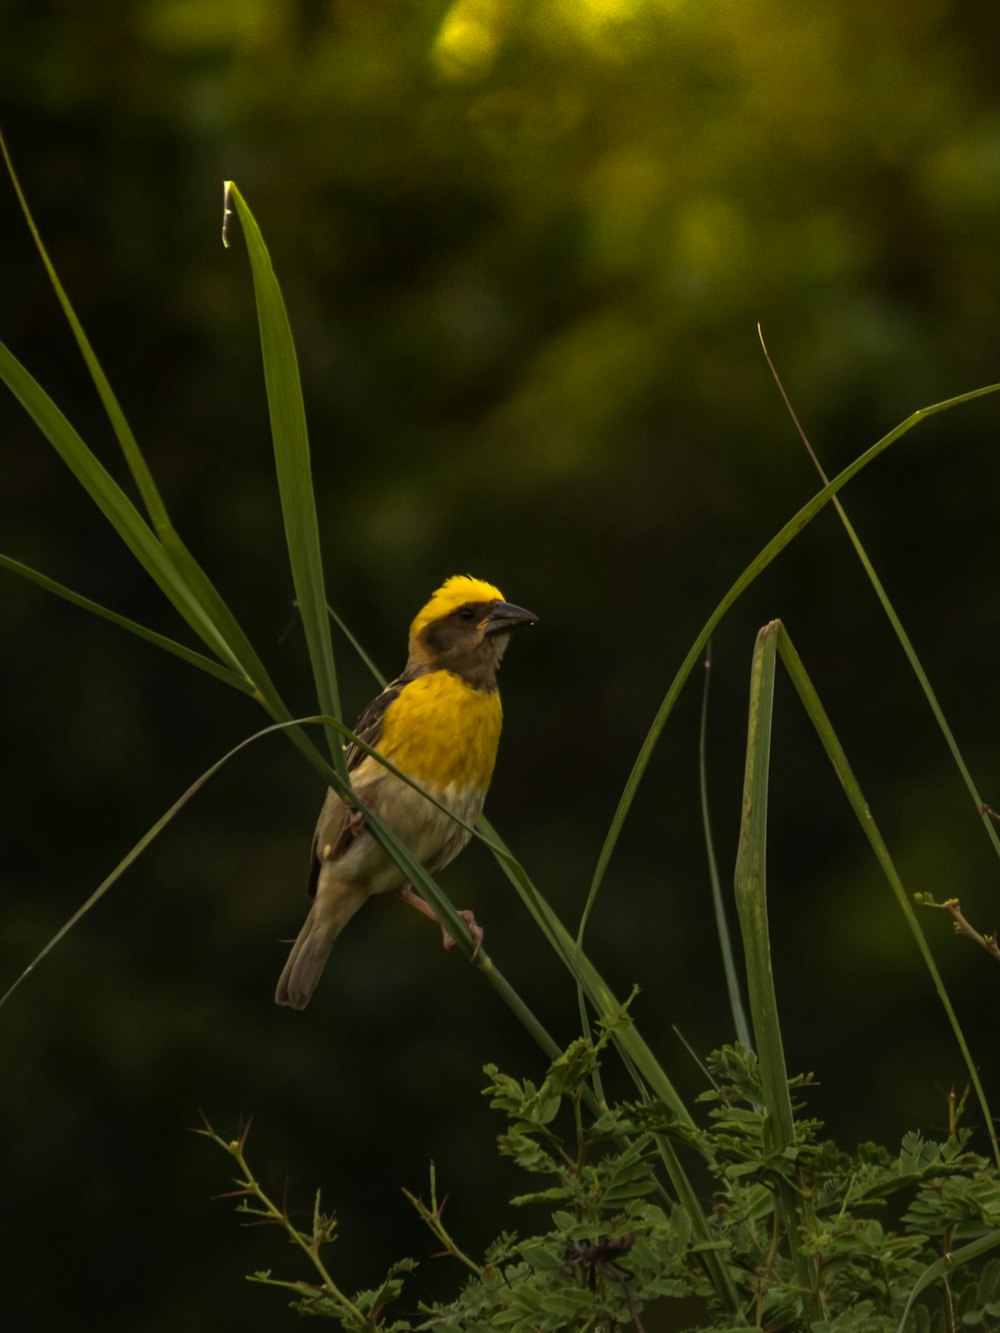 a small yellow bird perched on top of a green plant